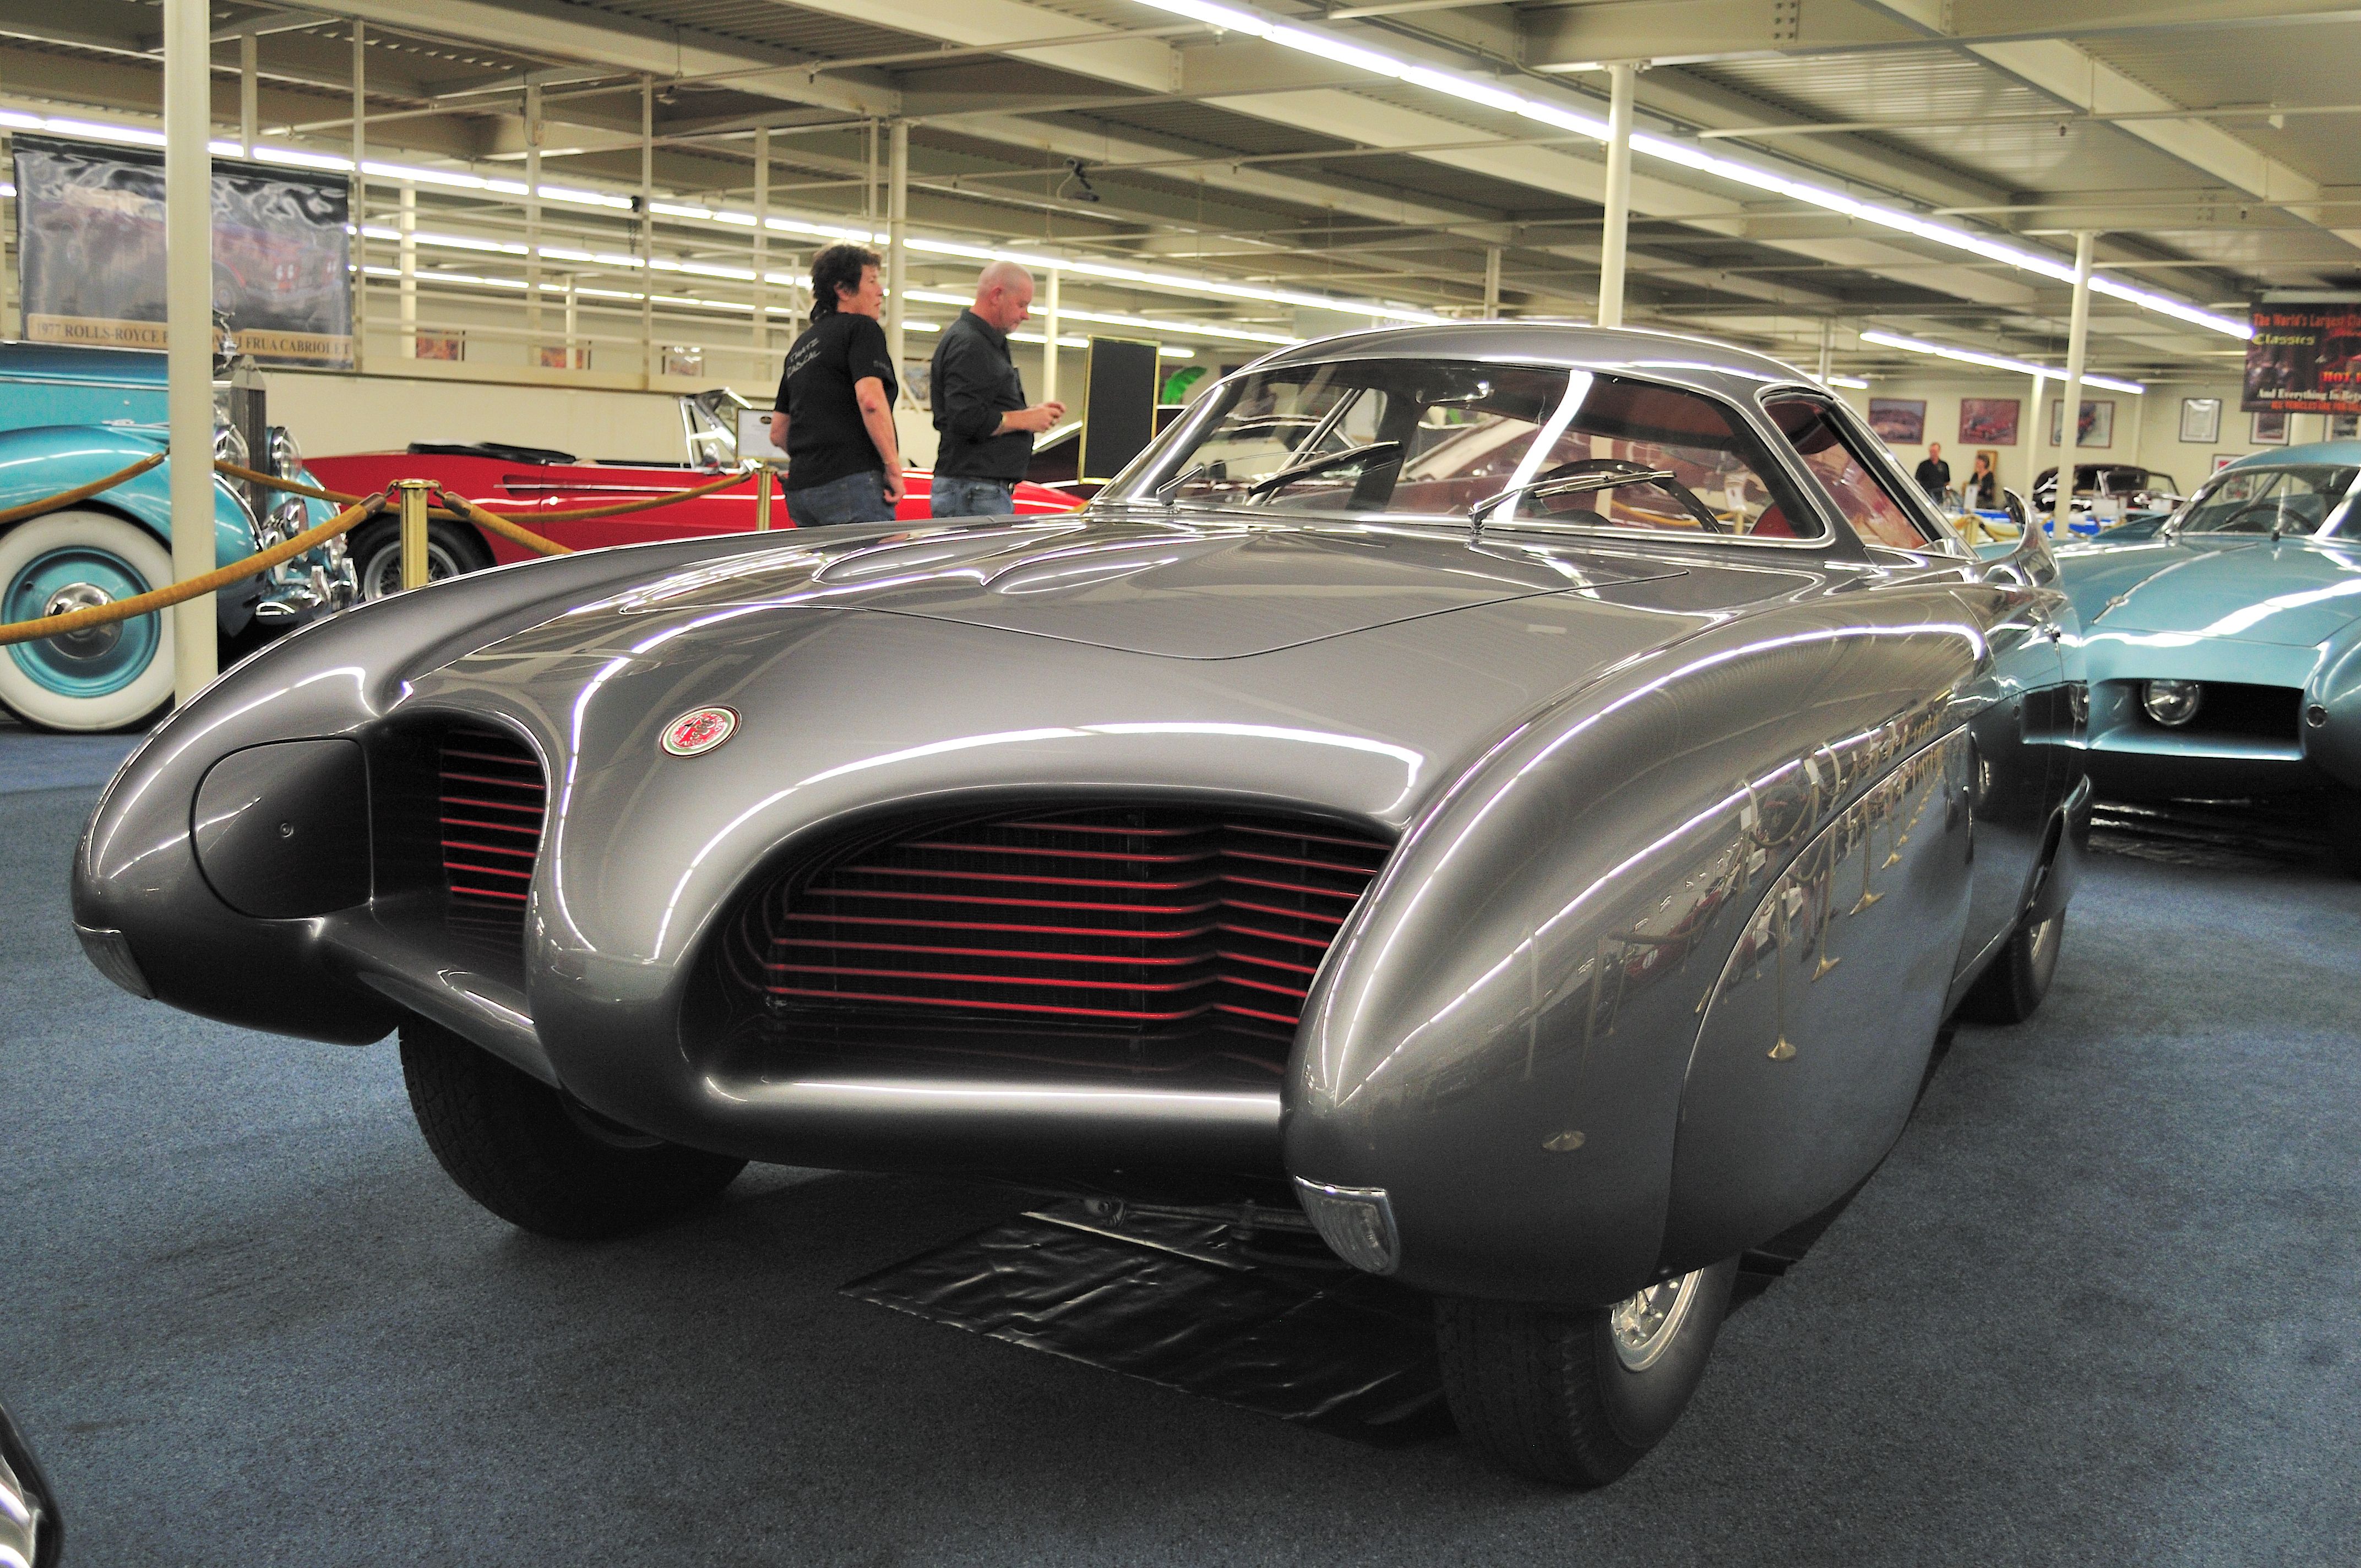 BAT5 was the first of the Bertone-Alfa Romeo BAT project. It was first shown at the Turin Auto show in 1953. The design of the model was based on a study of aerodynamics. The shape of the front in fact aims to eliminate the problem of airflow disruption at high speeds. The design also aims to do away with any extra resistance generated by the wheels turning, as well as achieving a structure which would create the fewest possible air vortices. In practice these rigorous criteria would allow the c